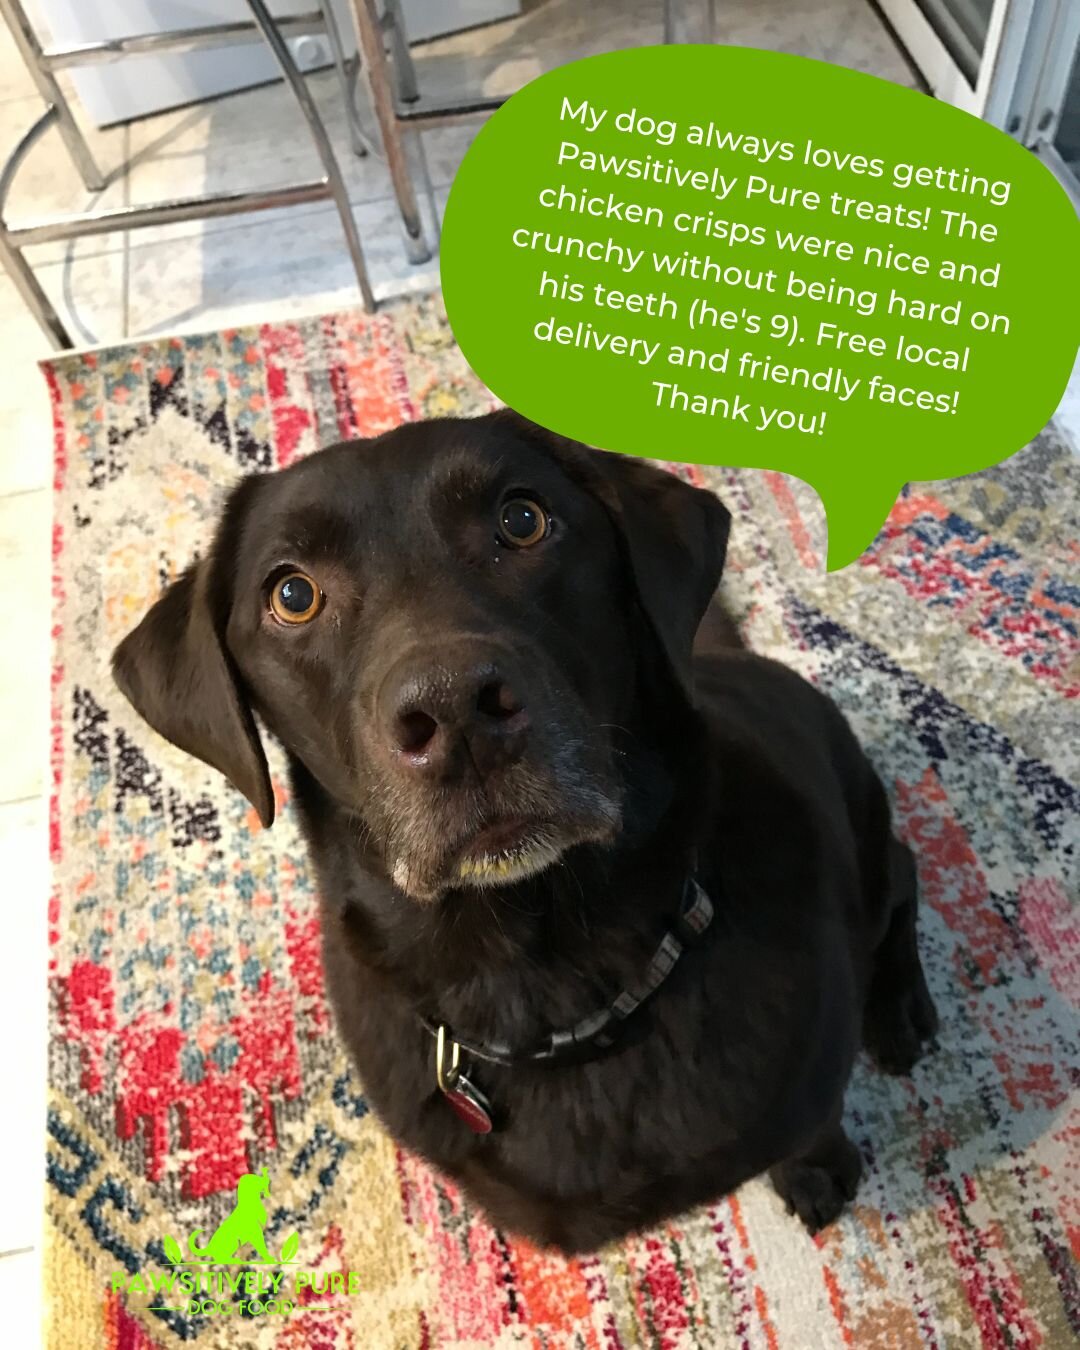 We are so proud to make food and treats for dogs of all ages and life stages! 🐾 Our wholesome treats and chicken crisps are formulated to delight your dog without being too hard to chew. 
 
Thanks for the great review! 🌟 If you've had a great exper